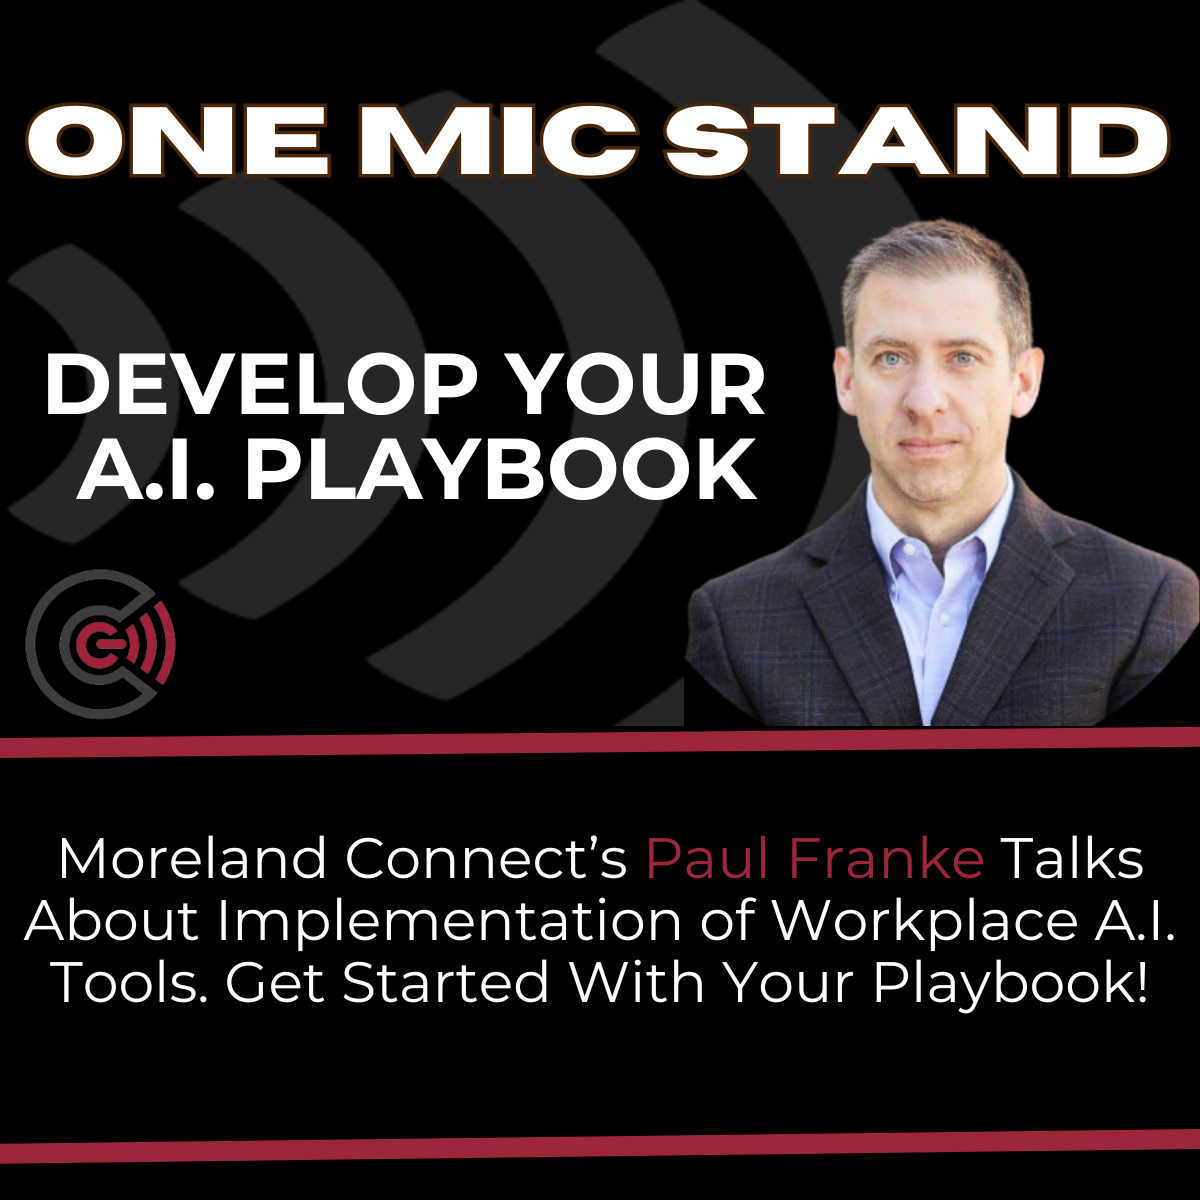 Moreland Connect's Paul Franke steps up to the One Mic Stand to detail the company's unique approach to helping its clients tap into the power of artificial intelligence (AI)